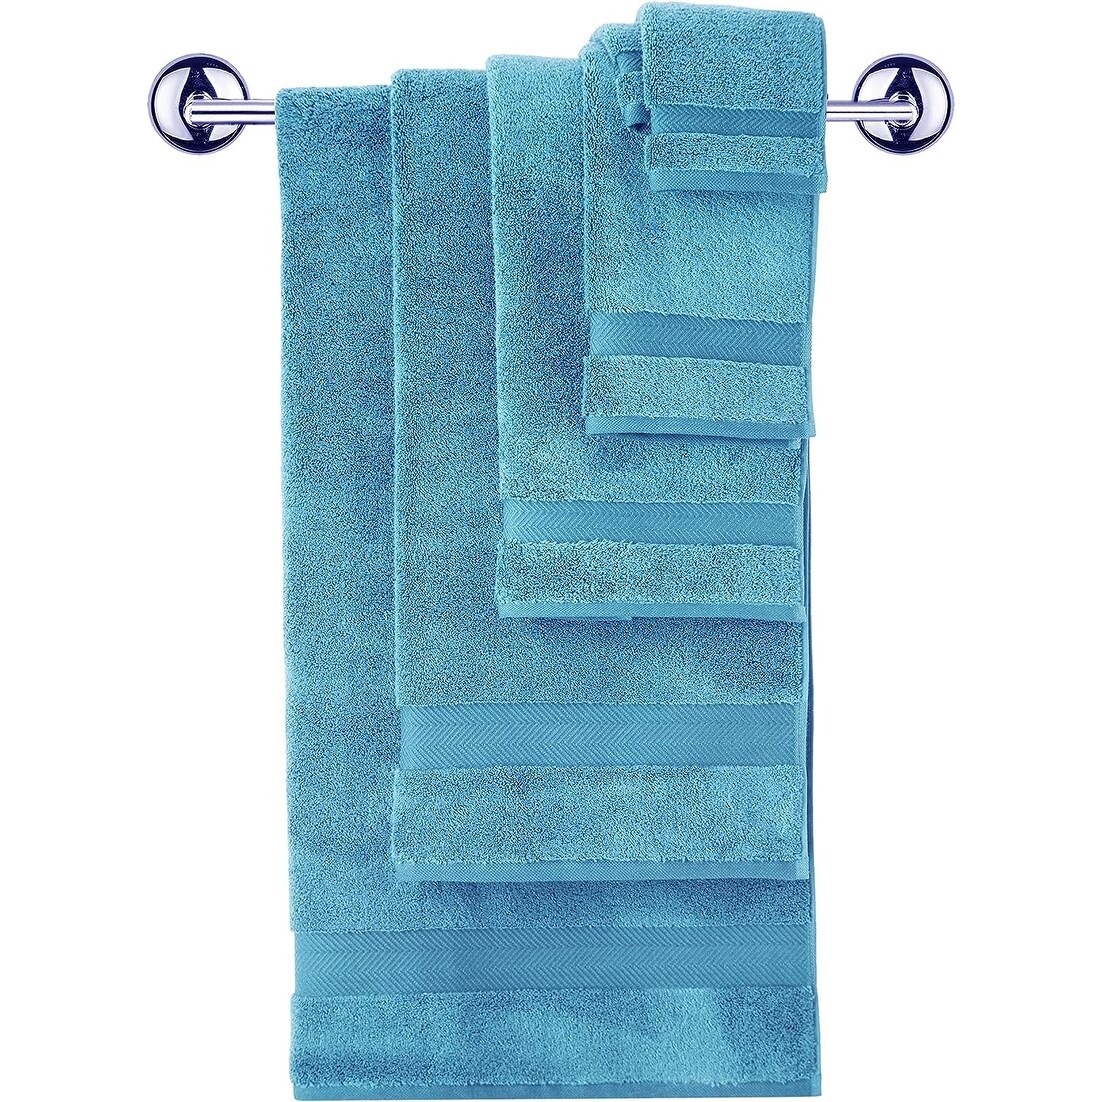 https://ak1.ostkcdn.com/images/products/is/images/direct/a44721192f1d10c0ff06ec3771a78565ee13ad4d/Towels-Beyond-Becci-Collection-Turkish-Cotton-Bathroom-Towel-Set---Luxury-and-Soft-Bath-Towel-%28Set-of-6%29.jpg